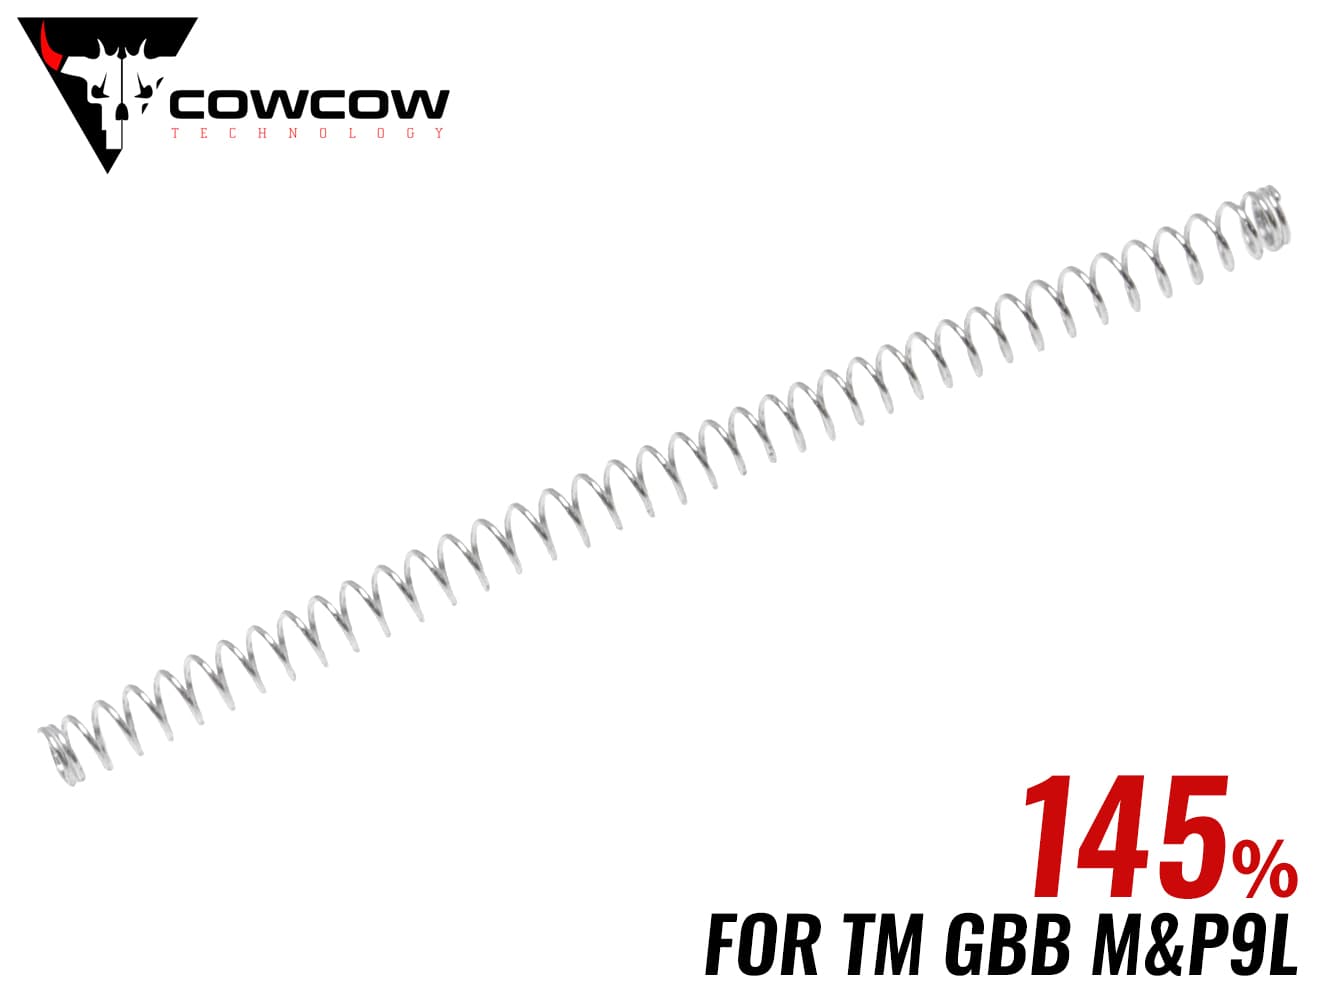 CCT-TMMP-011 COWCOW TECHNOLOGY A6061 ウルトラライトブリーチ M&P9L